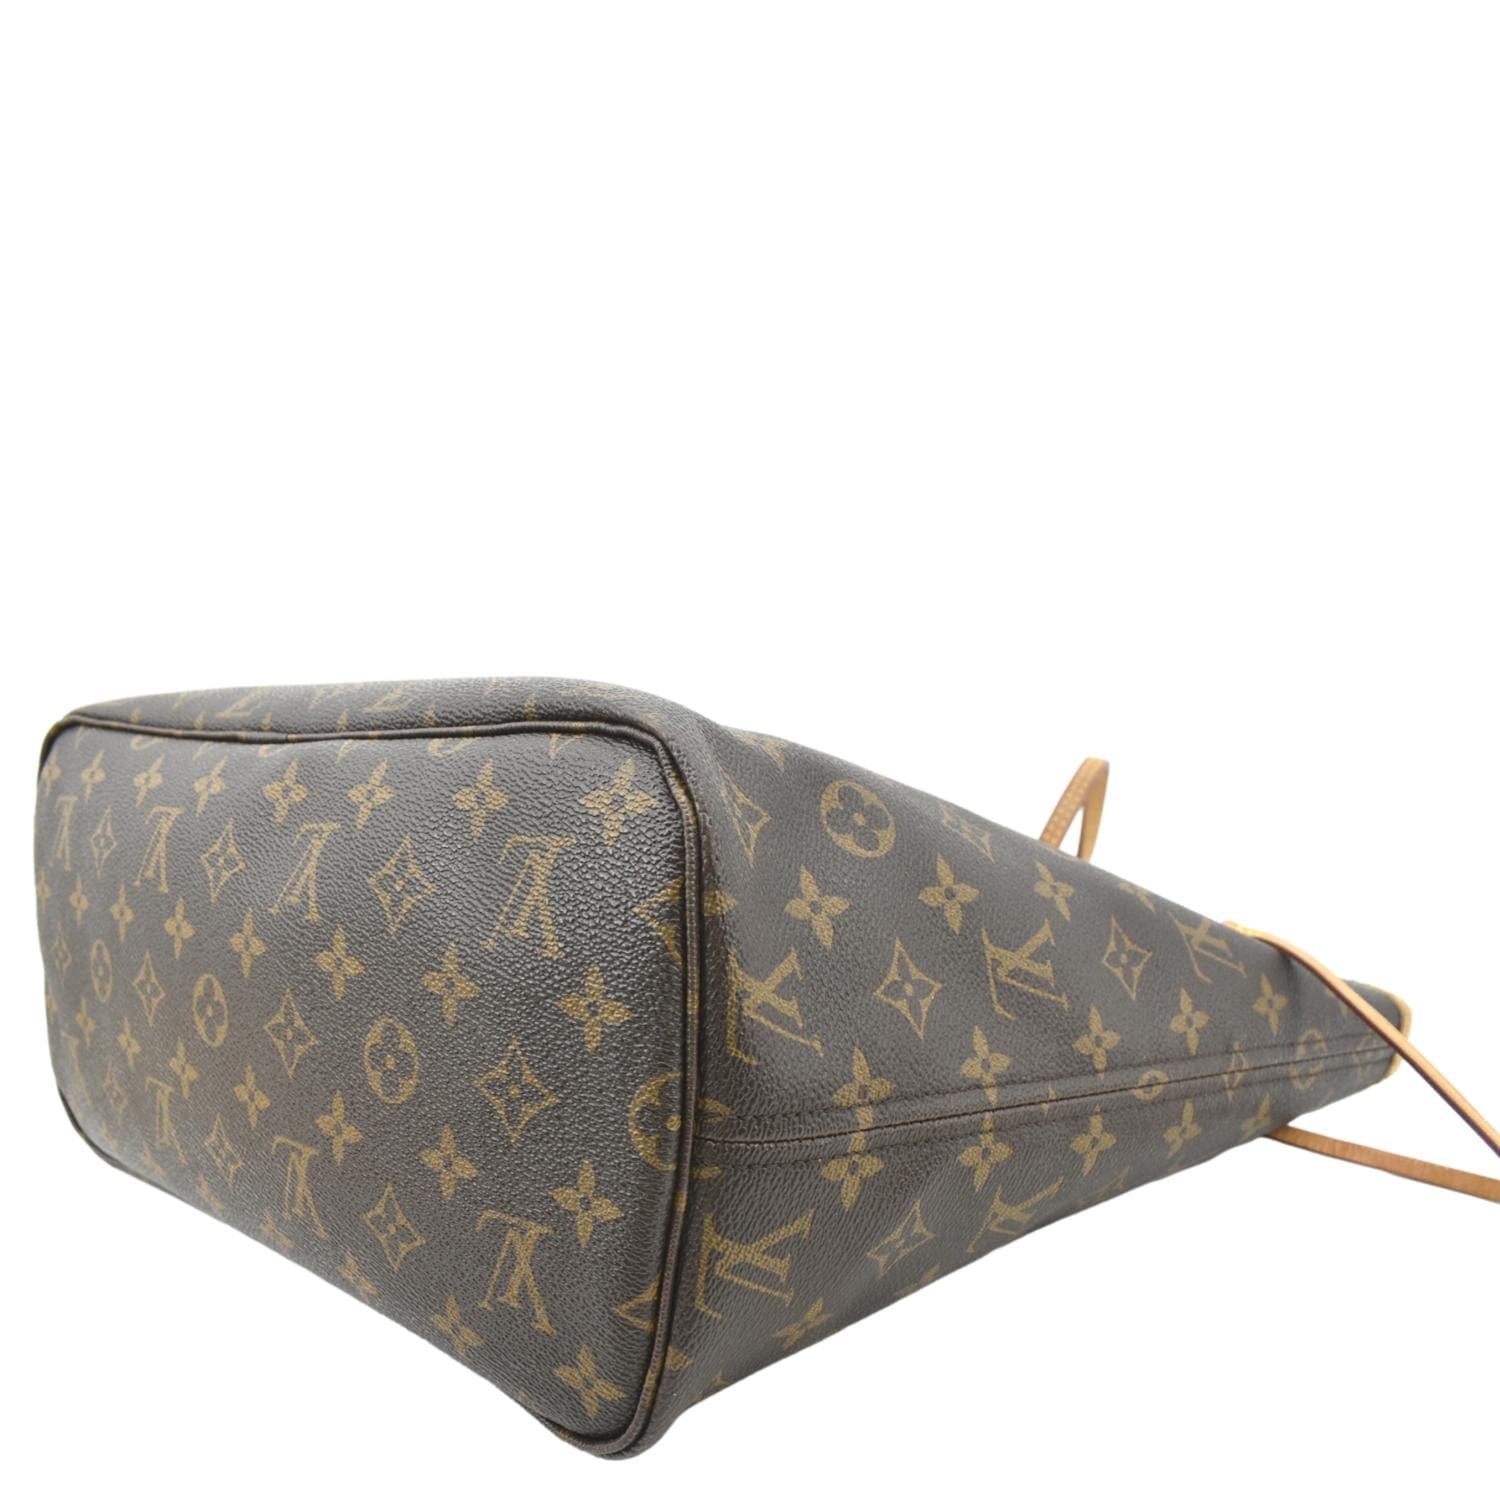 LuvScarlet - A beautifully Patina'd LOUIS VUITTON Neverfull MM in Monogram  with beige interior. Fantastic price on this one and it comes with a luxury  leather cleaning done by us. DM for